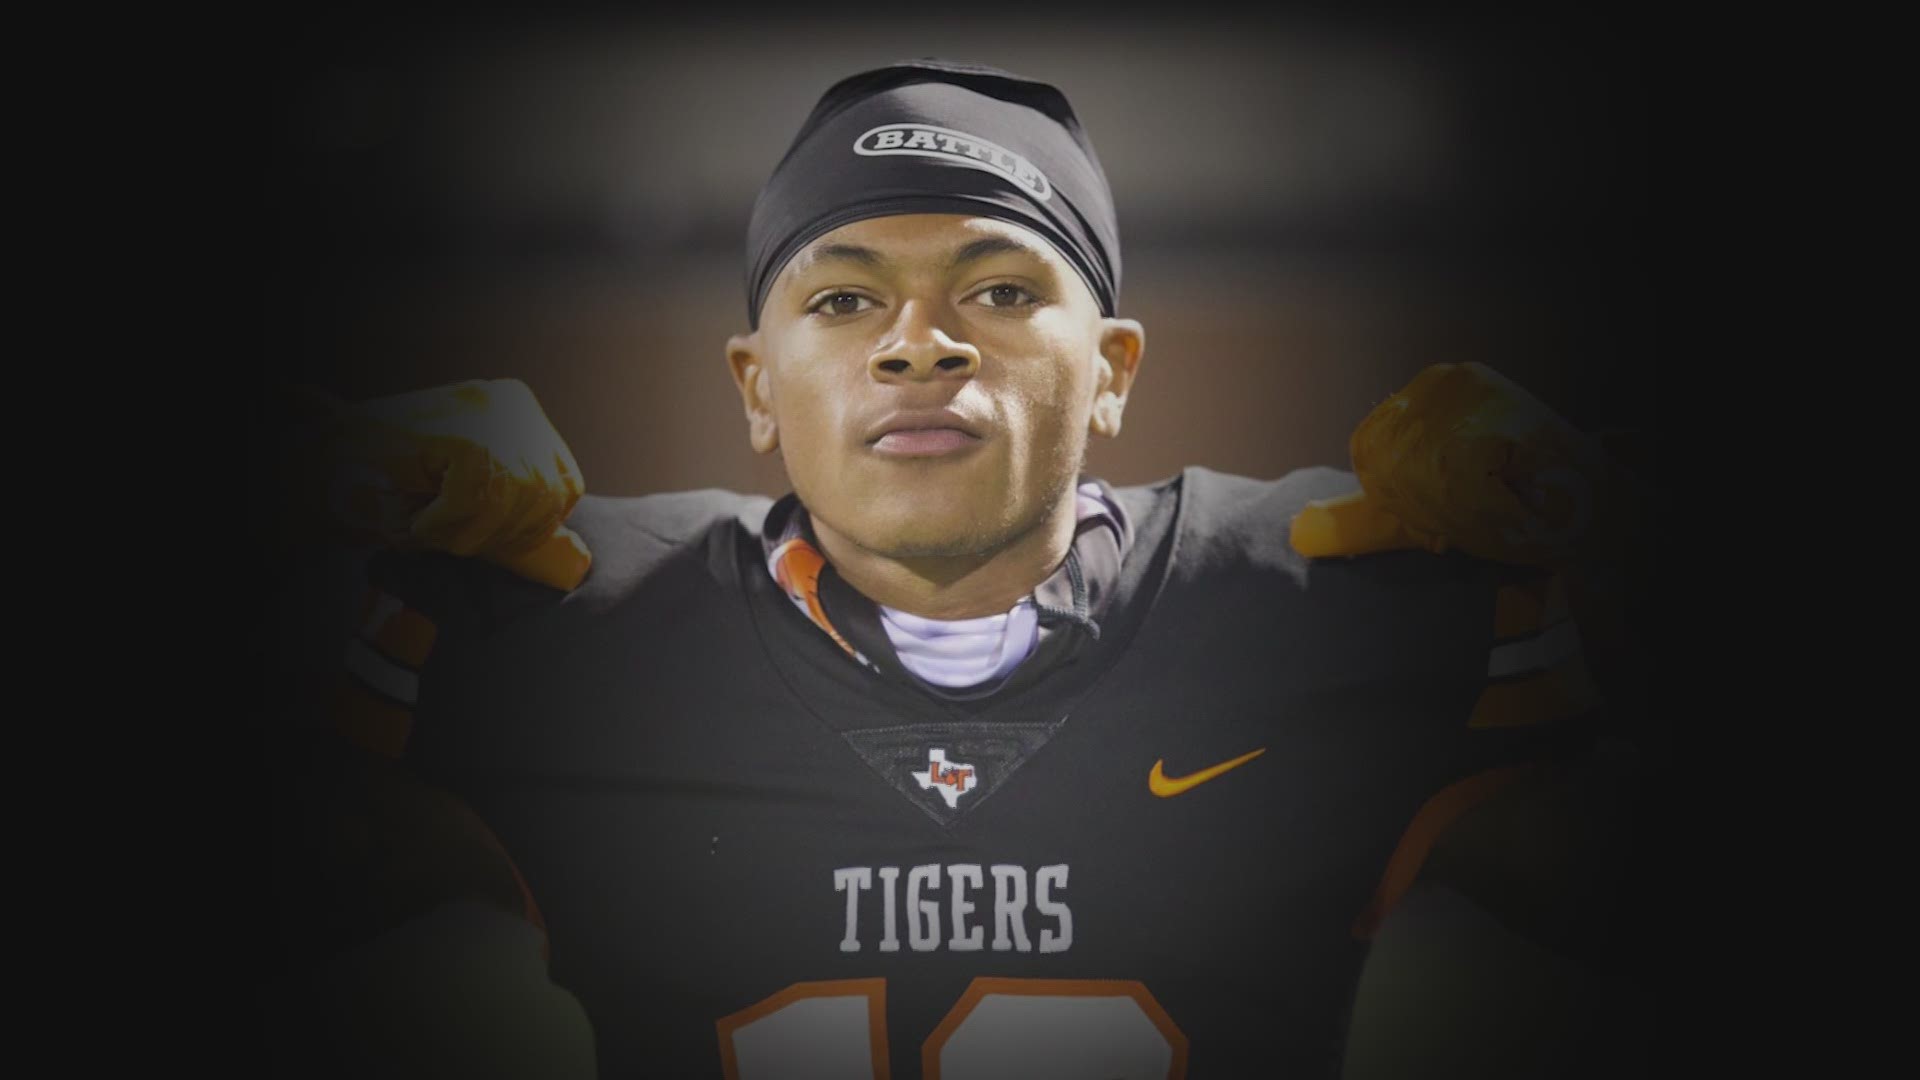 Lancaster High School football star and University of Wyoming recruit Tony Evans Jr. was shot and killed in Dallas early Sunday morning.